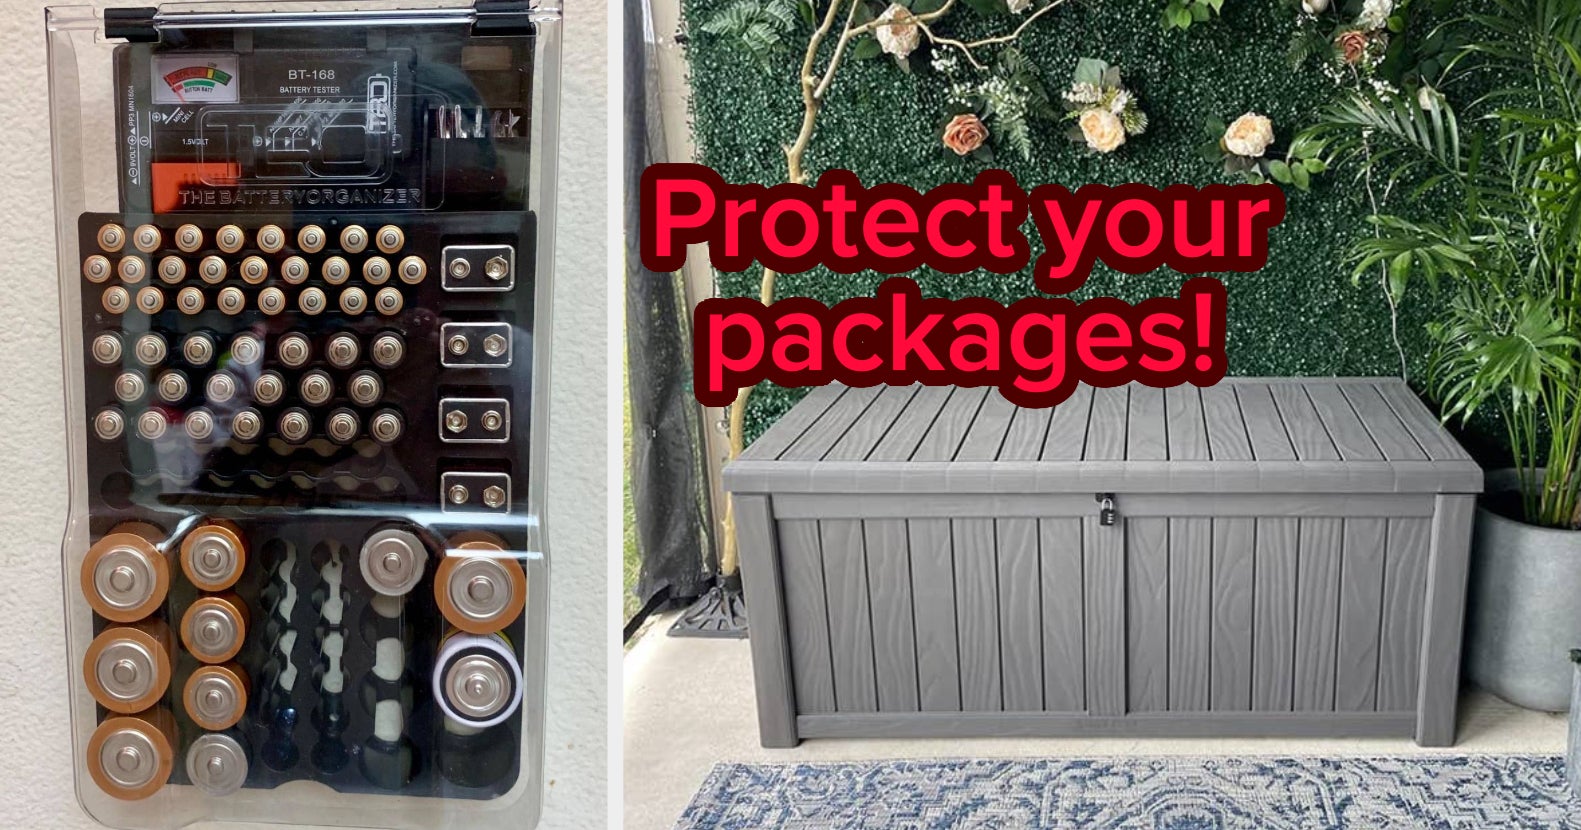 We've got all the accessories you'll need for your home freeze